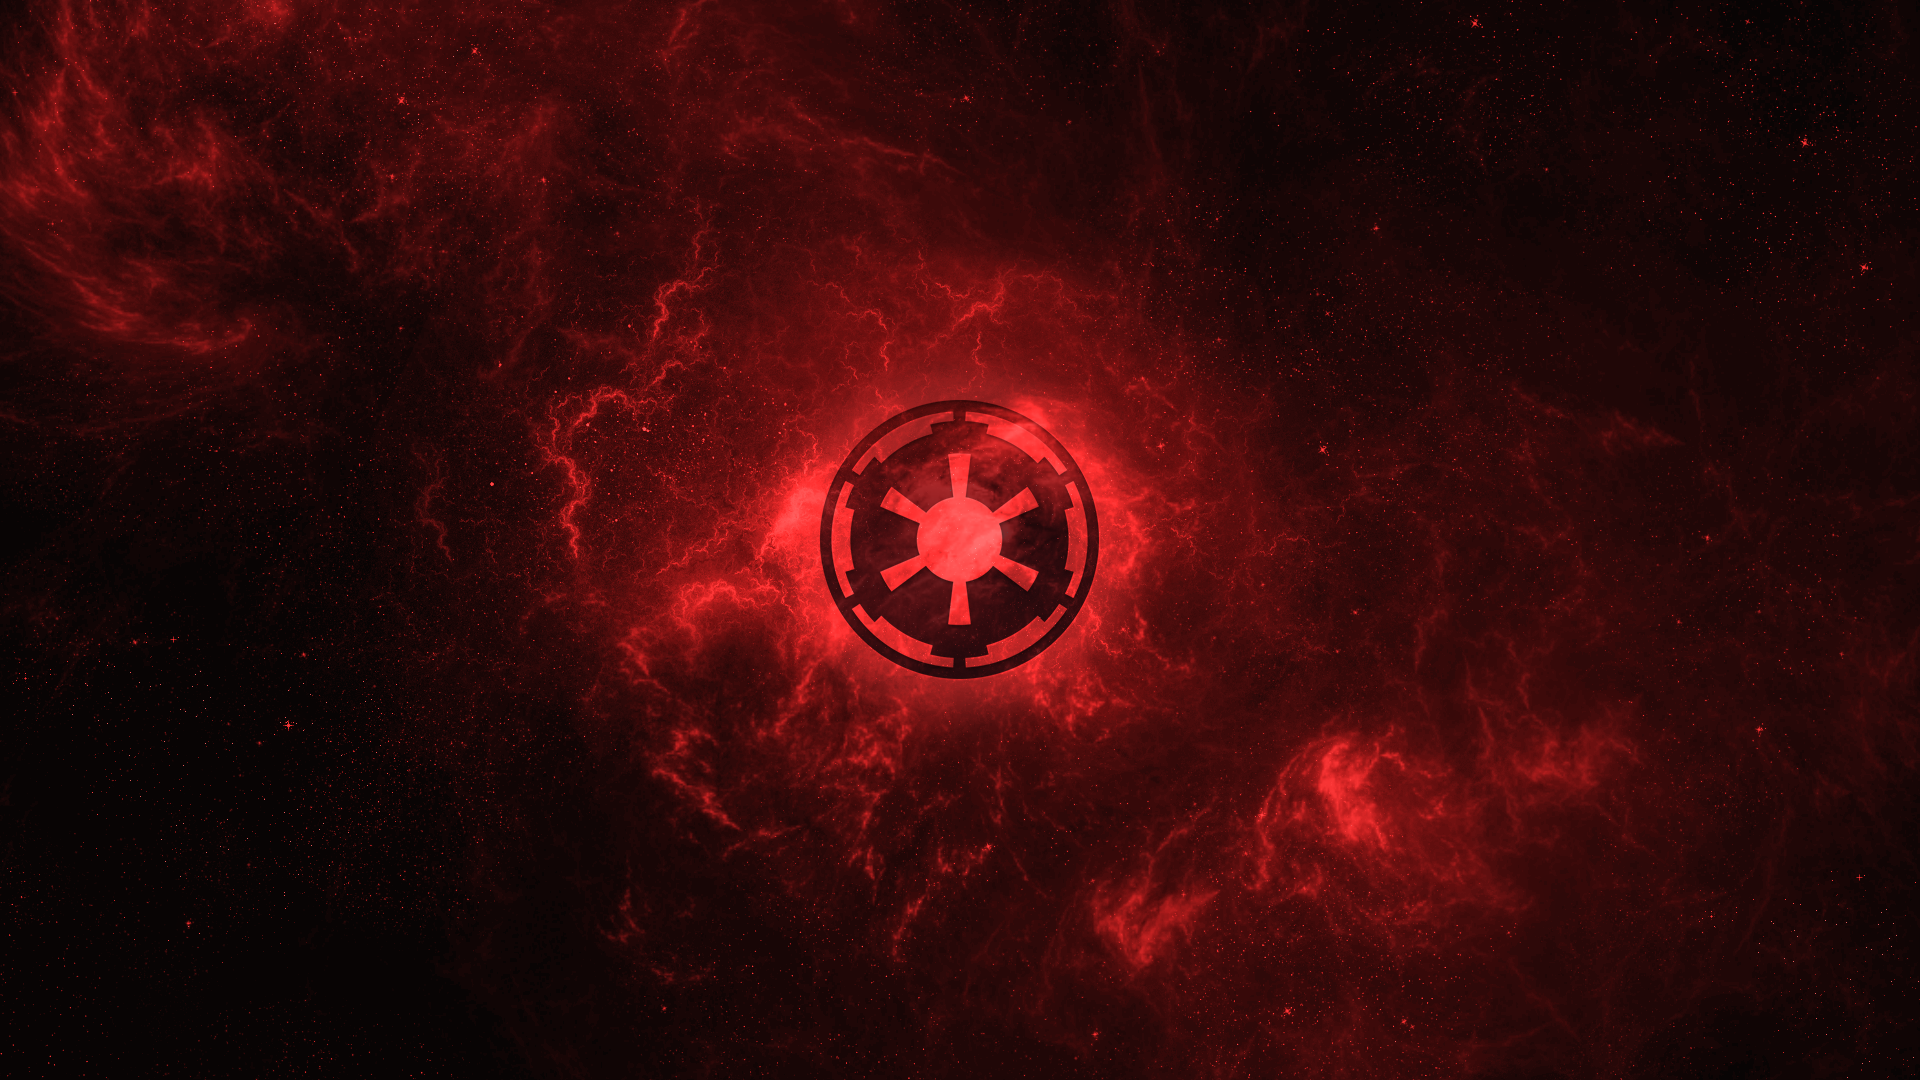 Star Wars Sith Empire Wallpaper Free Star Wars Sith Empire Background